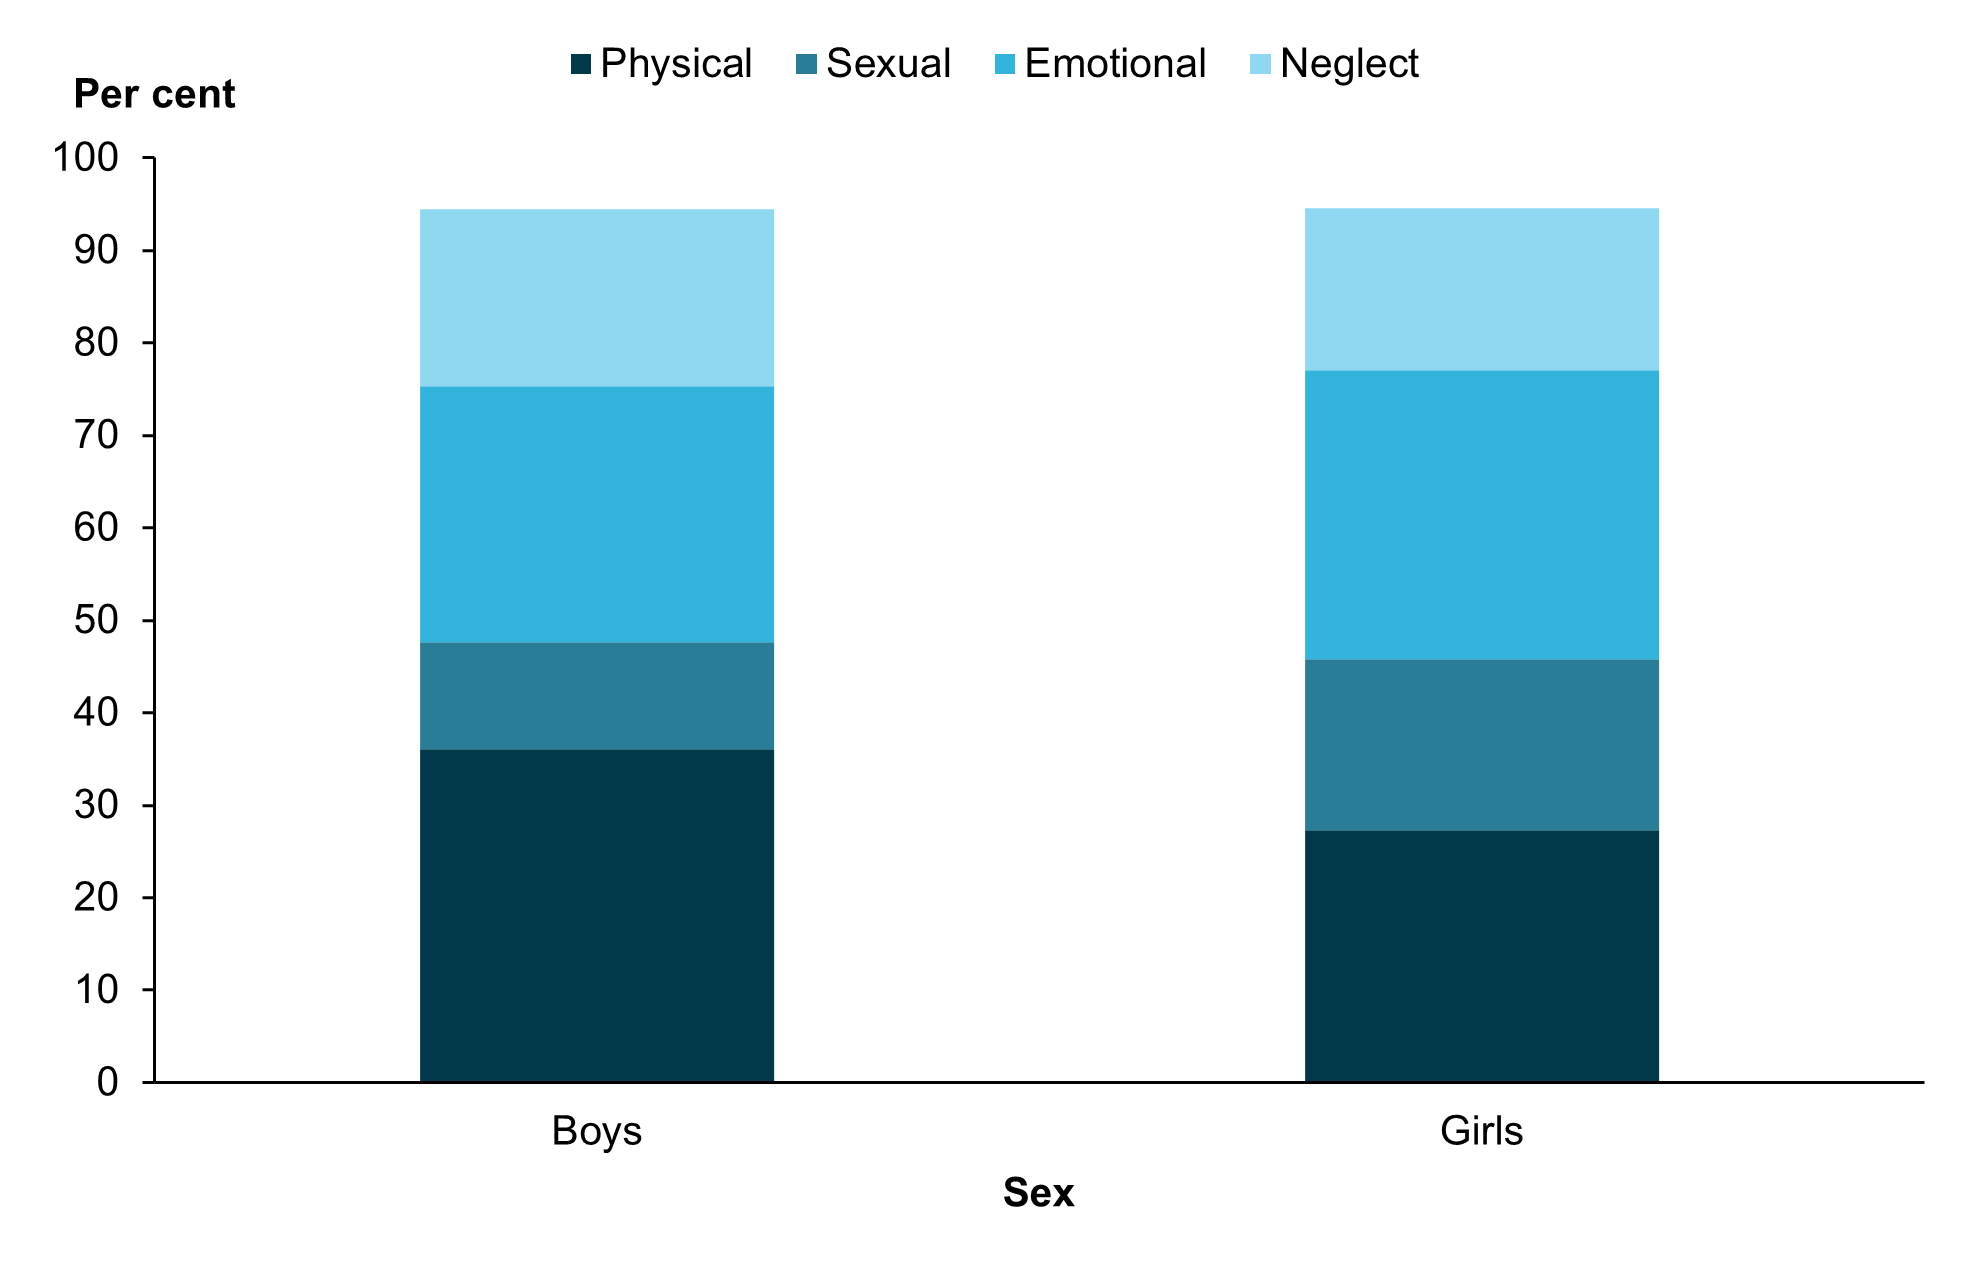 Chart shows that physical and emotional abuse were most common for boys and girls. Sexual abuse was most common among girls while neglect was similar for boys and girls.